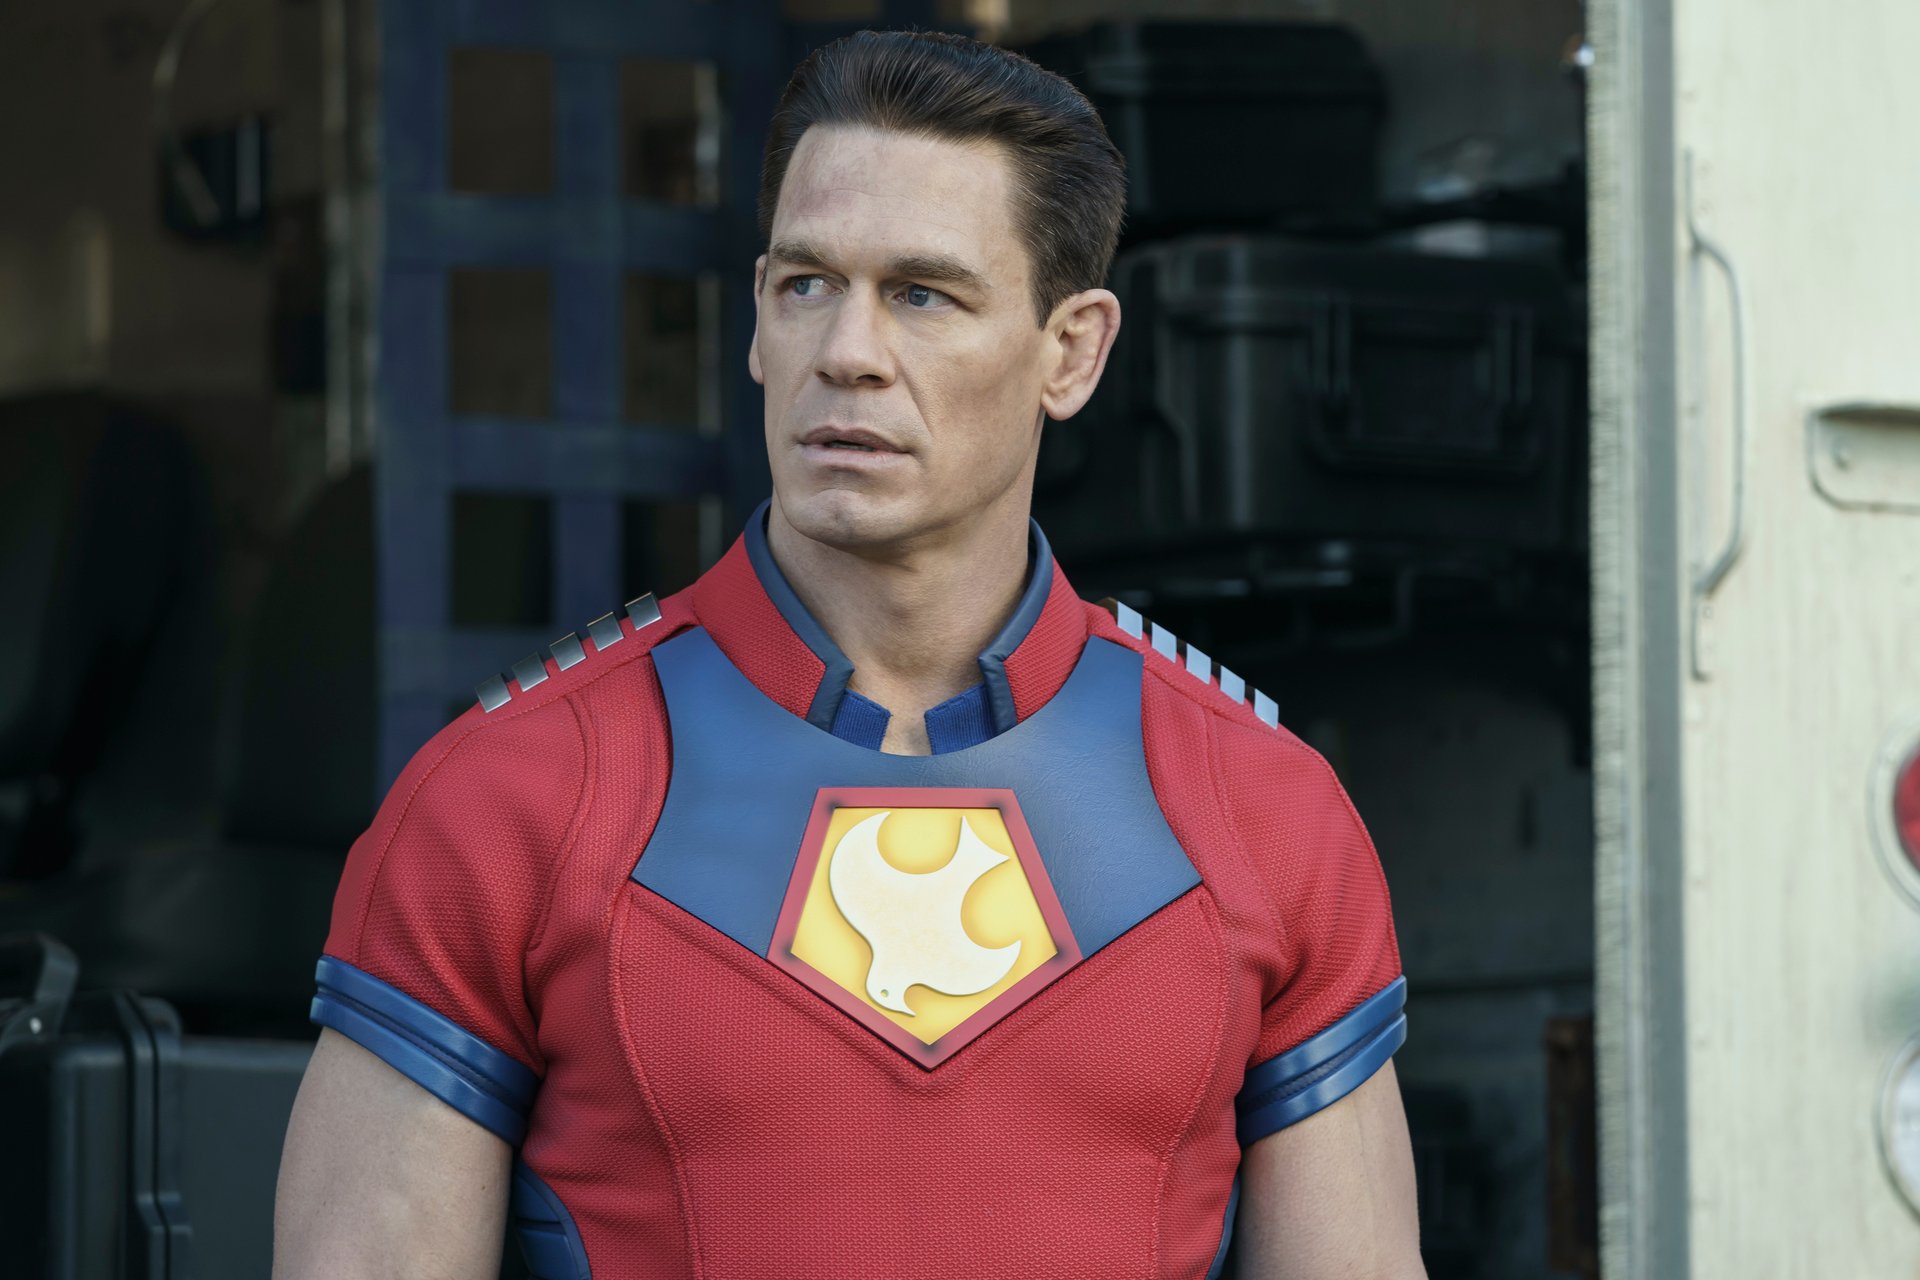 John Cena in episode 3 of DC's 'Peacemaker.' He's wearing his red, yellow, and blue suit and looking to the side.